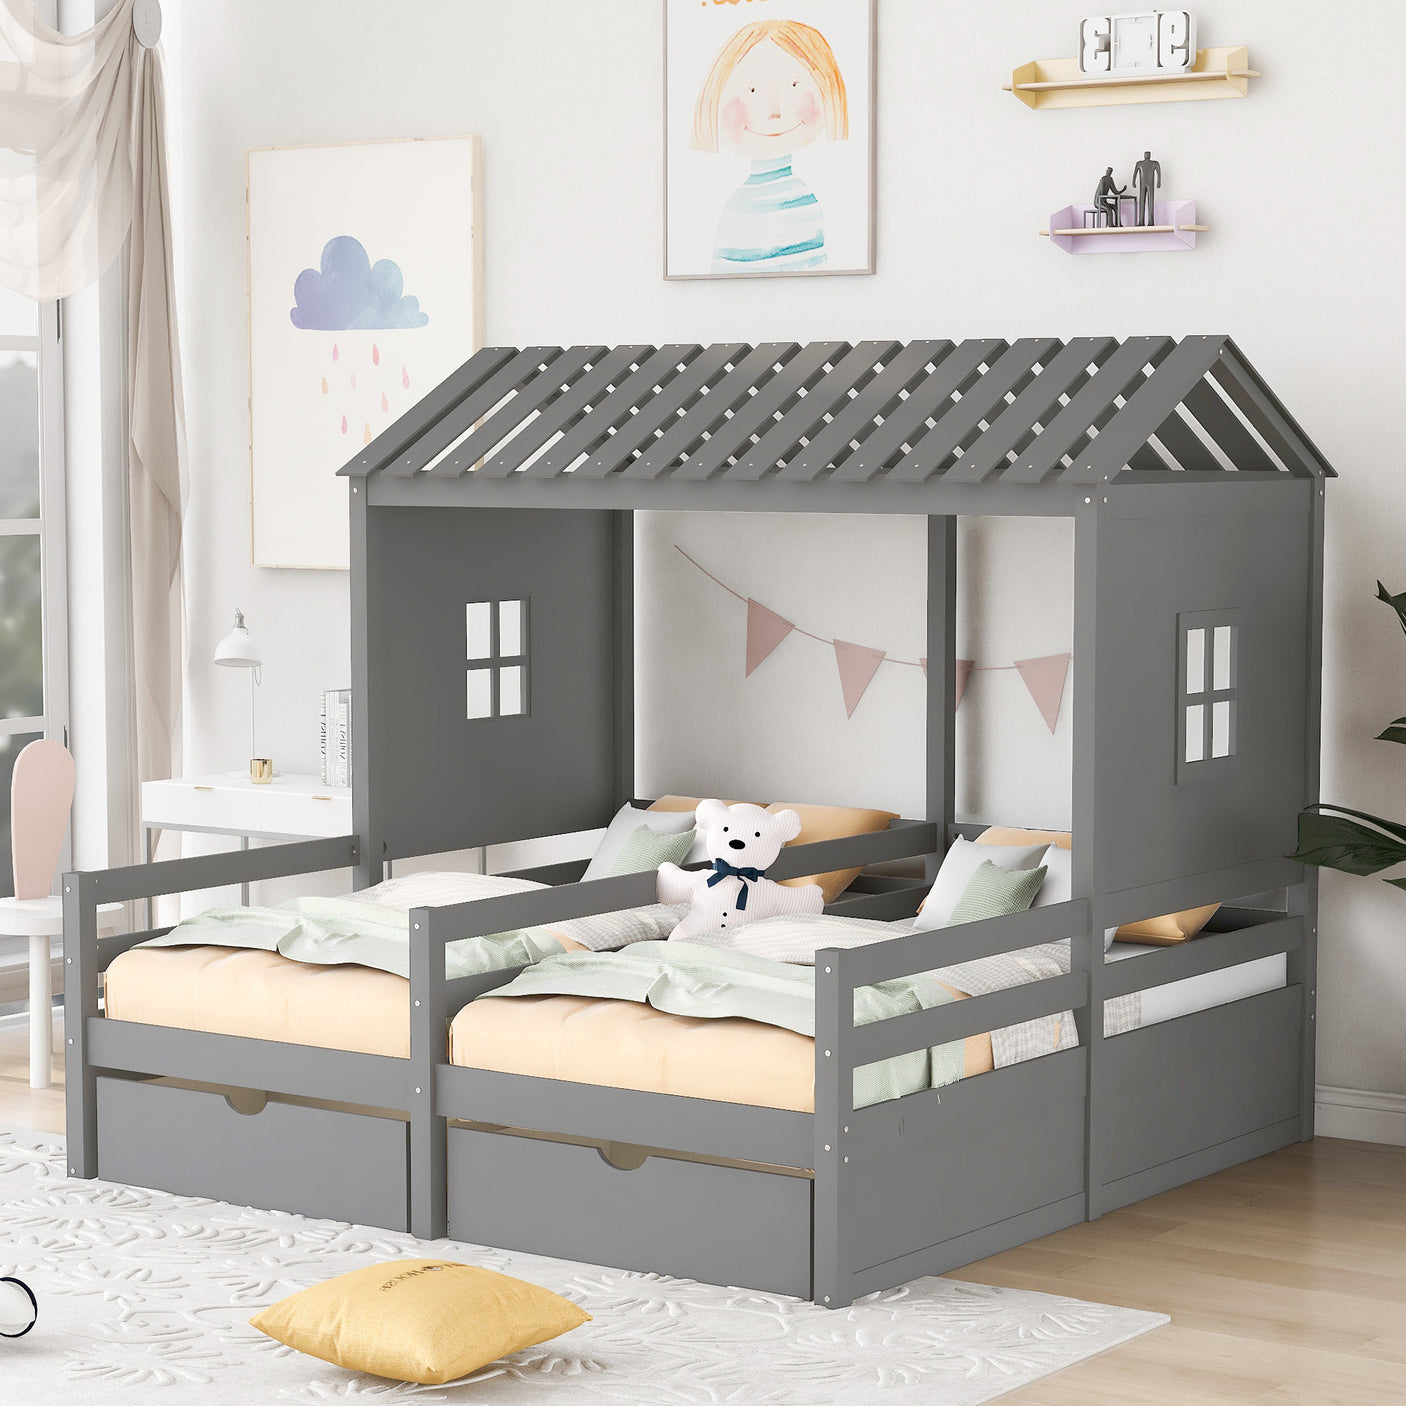 Twin Size House Platform Beds with Two Drawers for Boy and Girl Shared Beds, Combination of 2 Side by Side Twin Size Beds,Grey - Home Elegance USA